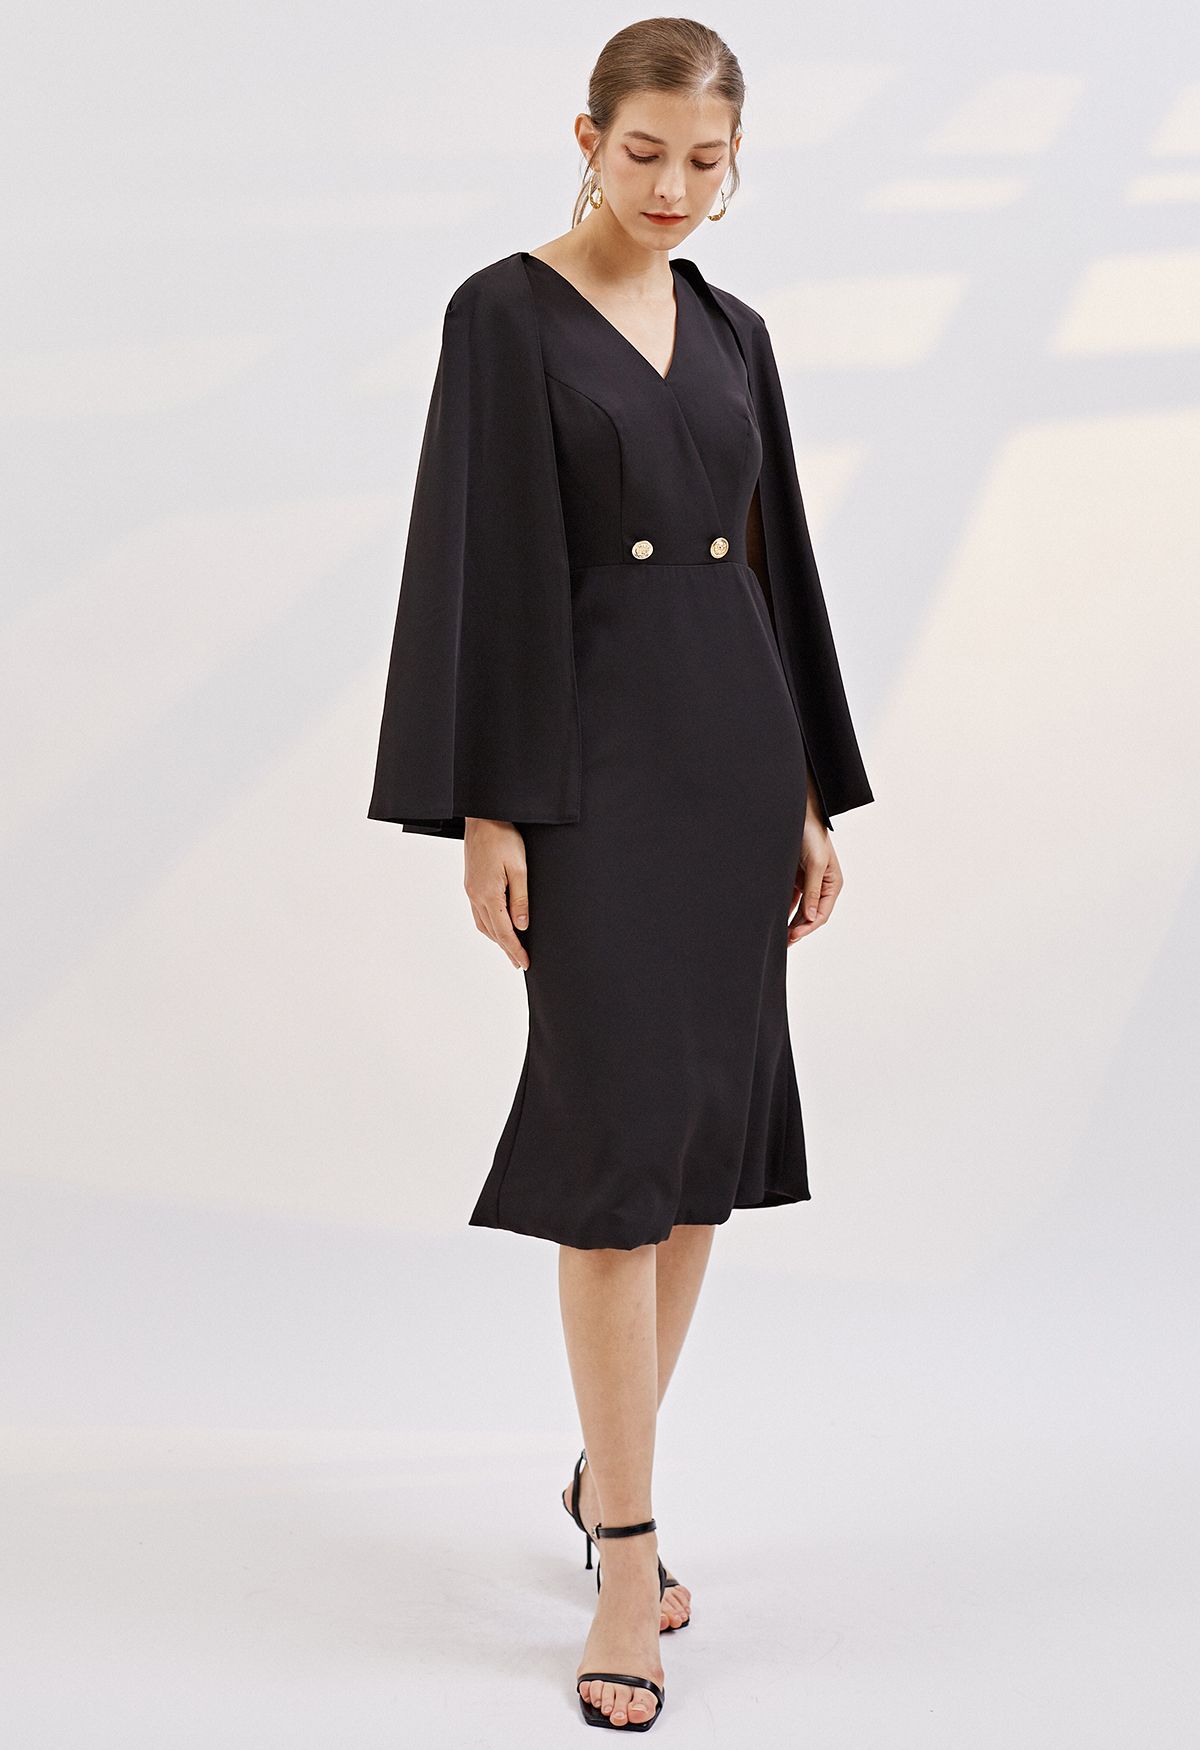 Golden Button Cape Sleeve Cocktail Dress in Black